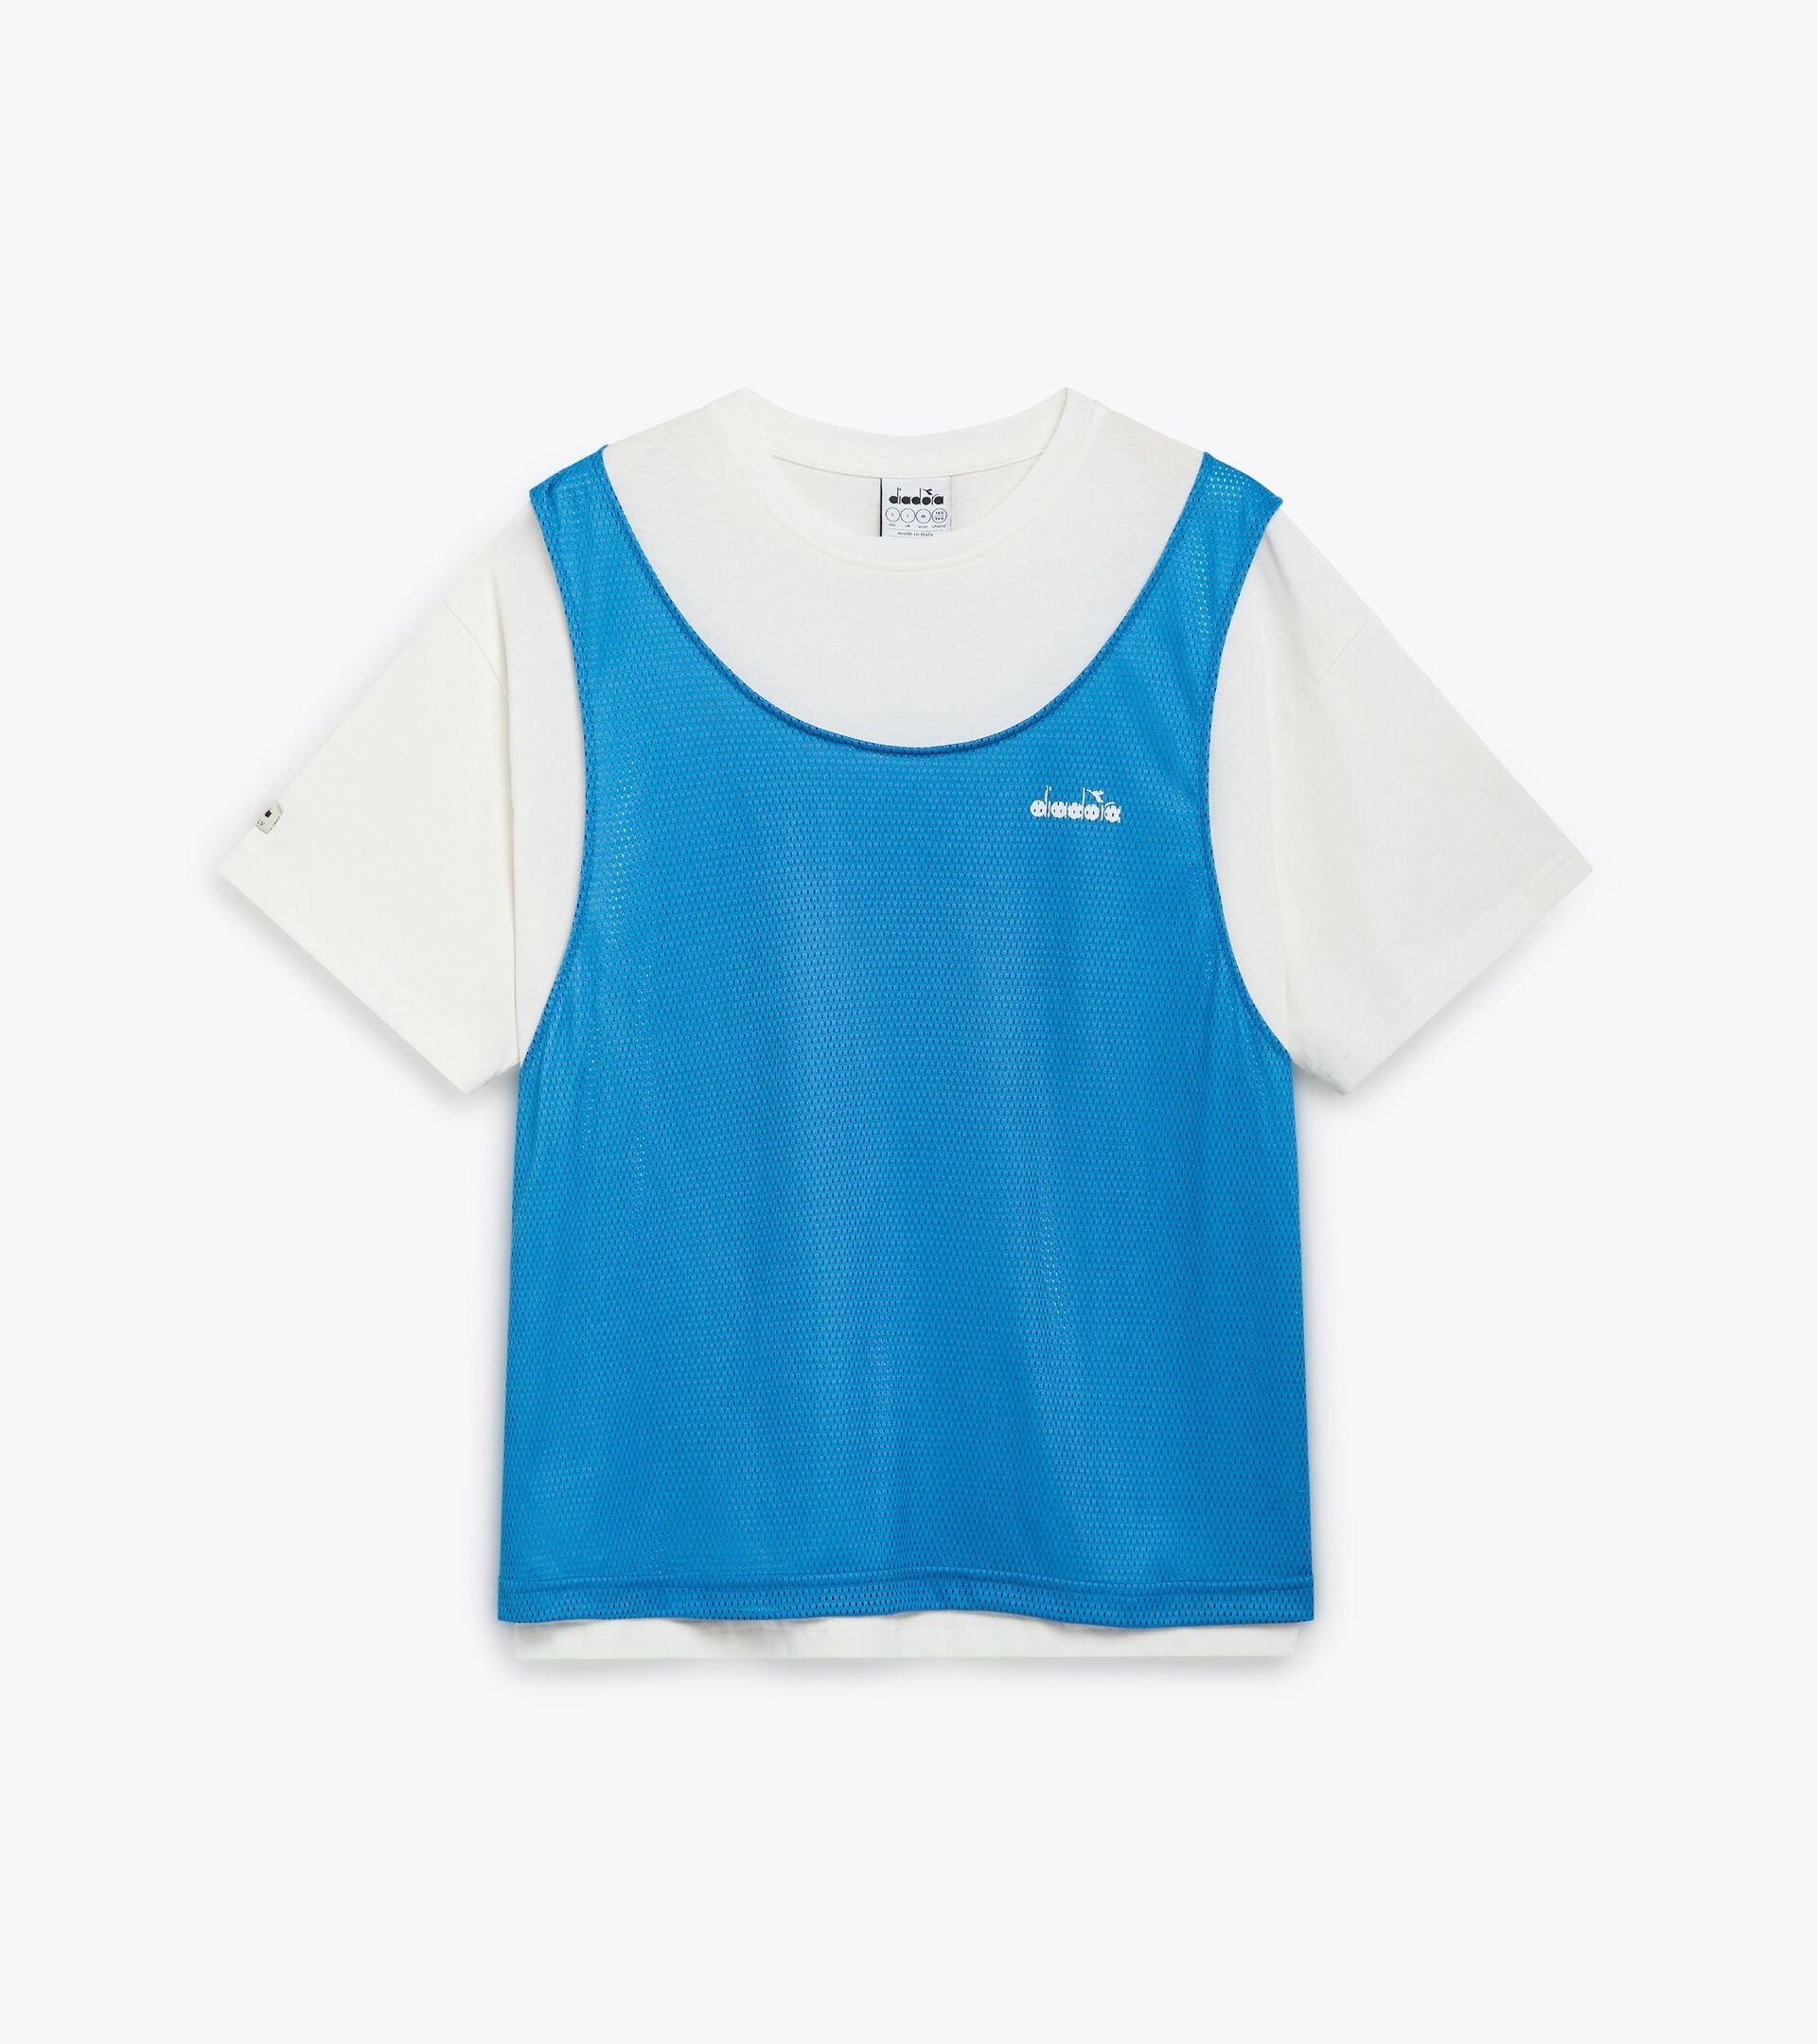 T-shirt and tank top combo - Made in Italy - Gender Neutral
 T-SHIRT SS 2-IN-1 LEGACY PACIFIC COAST - Diadora